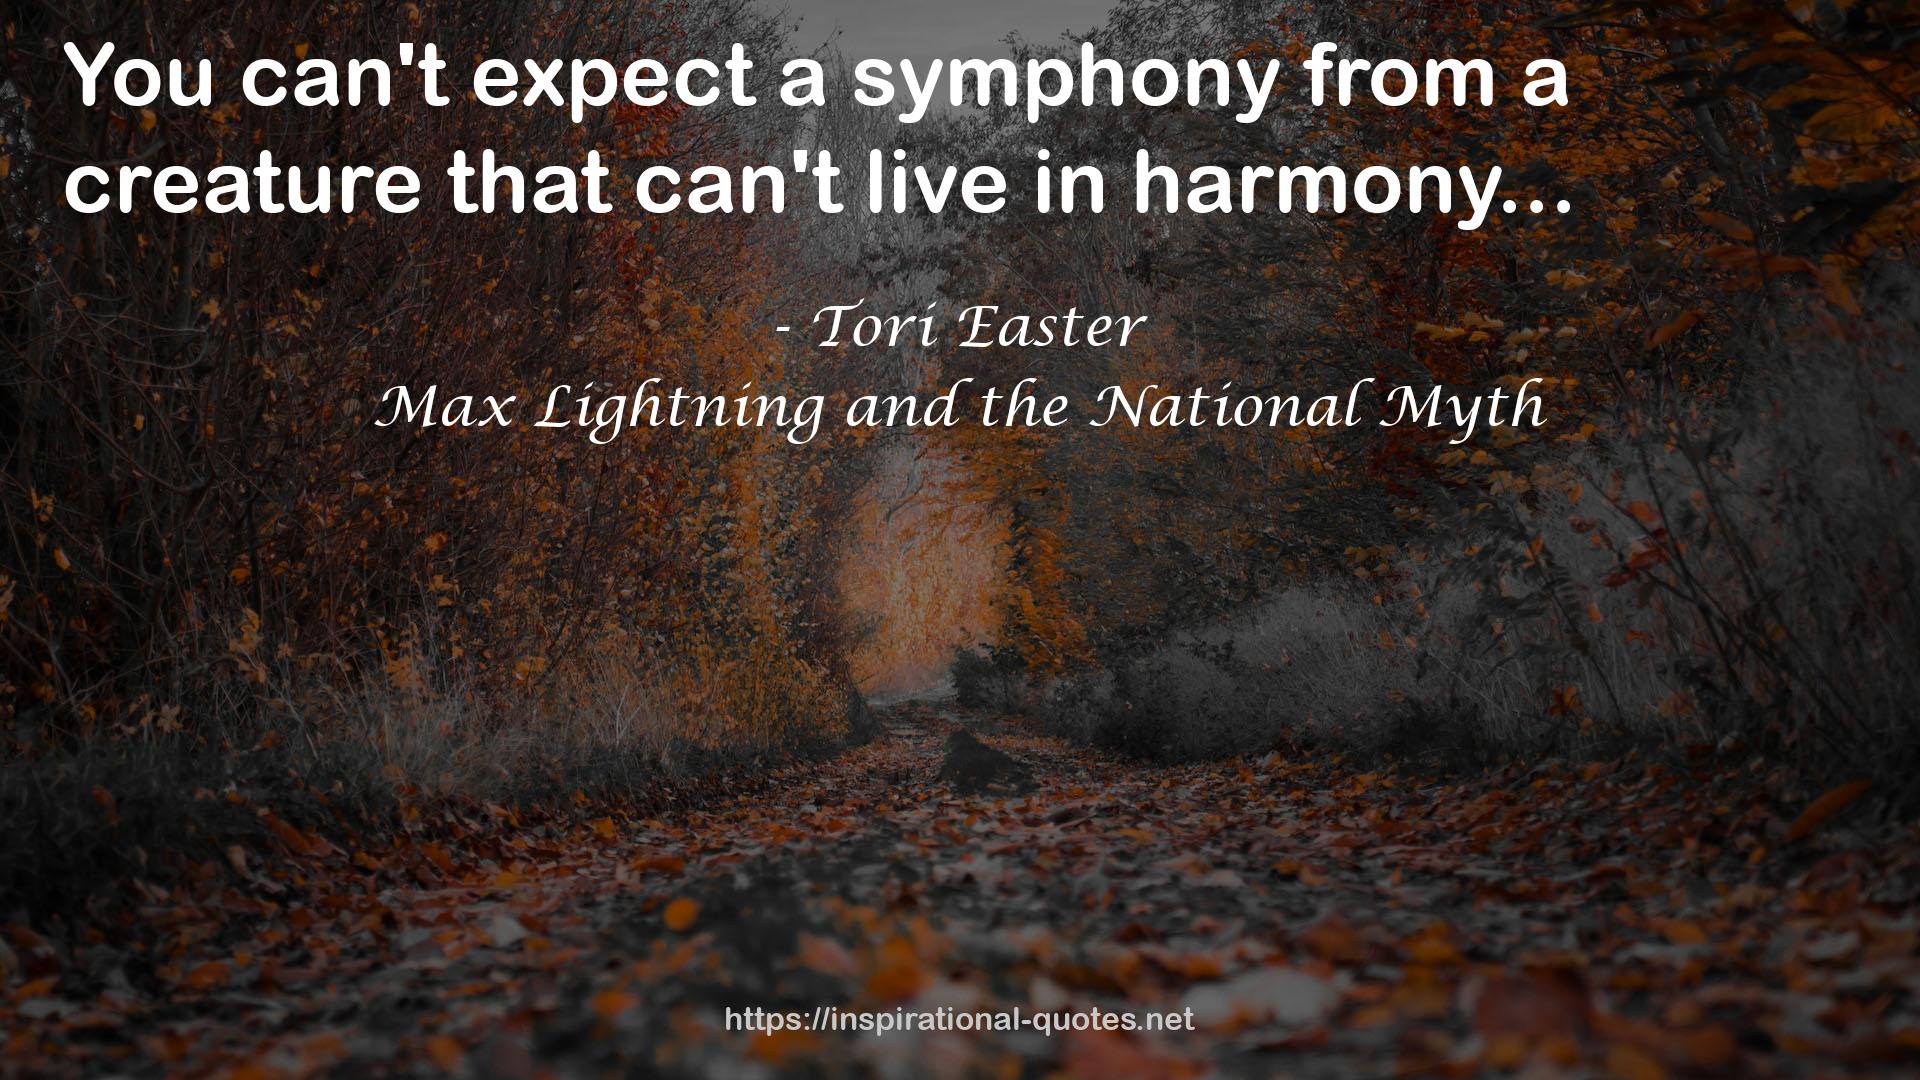 Max Lightning and the National Myth QUOTES